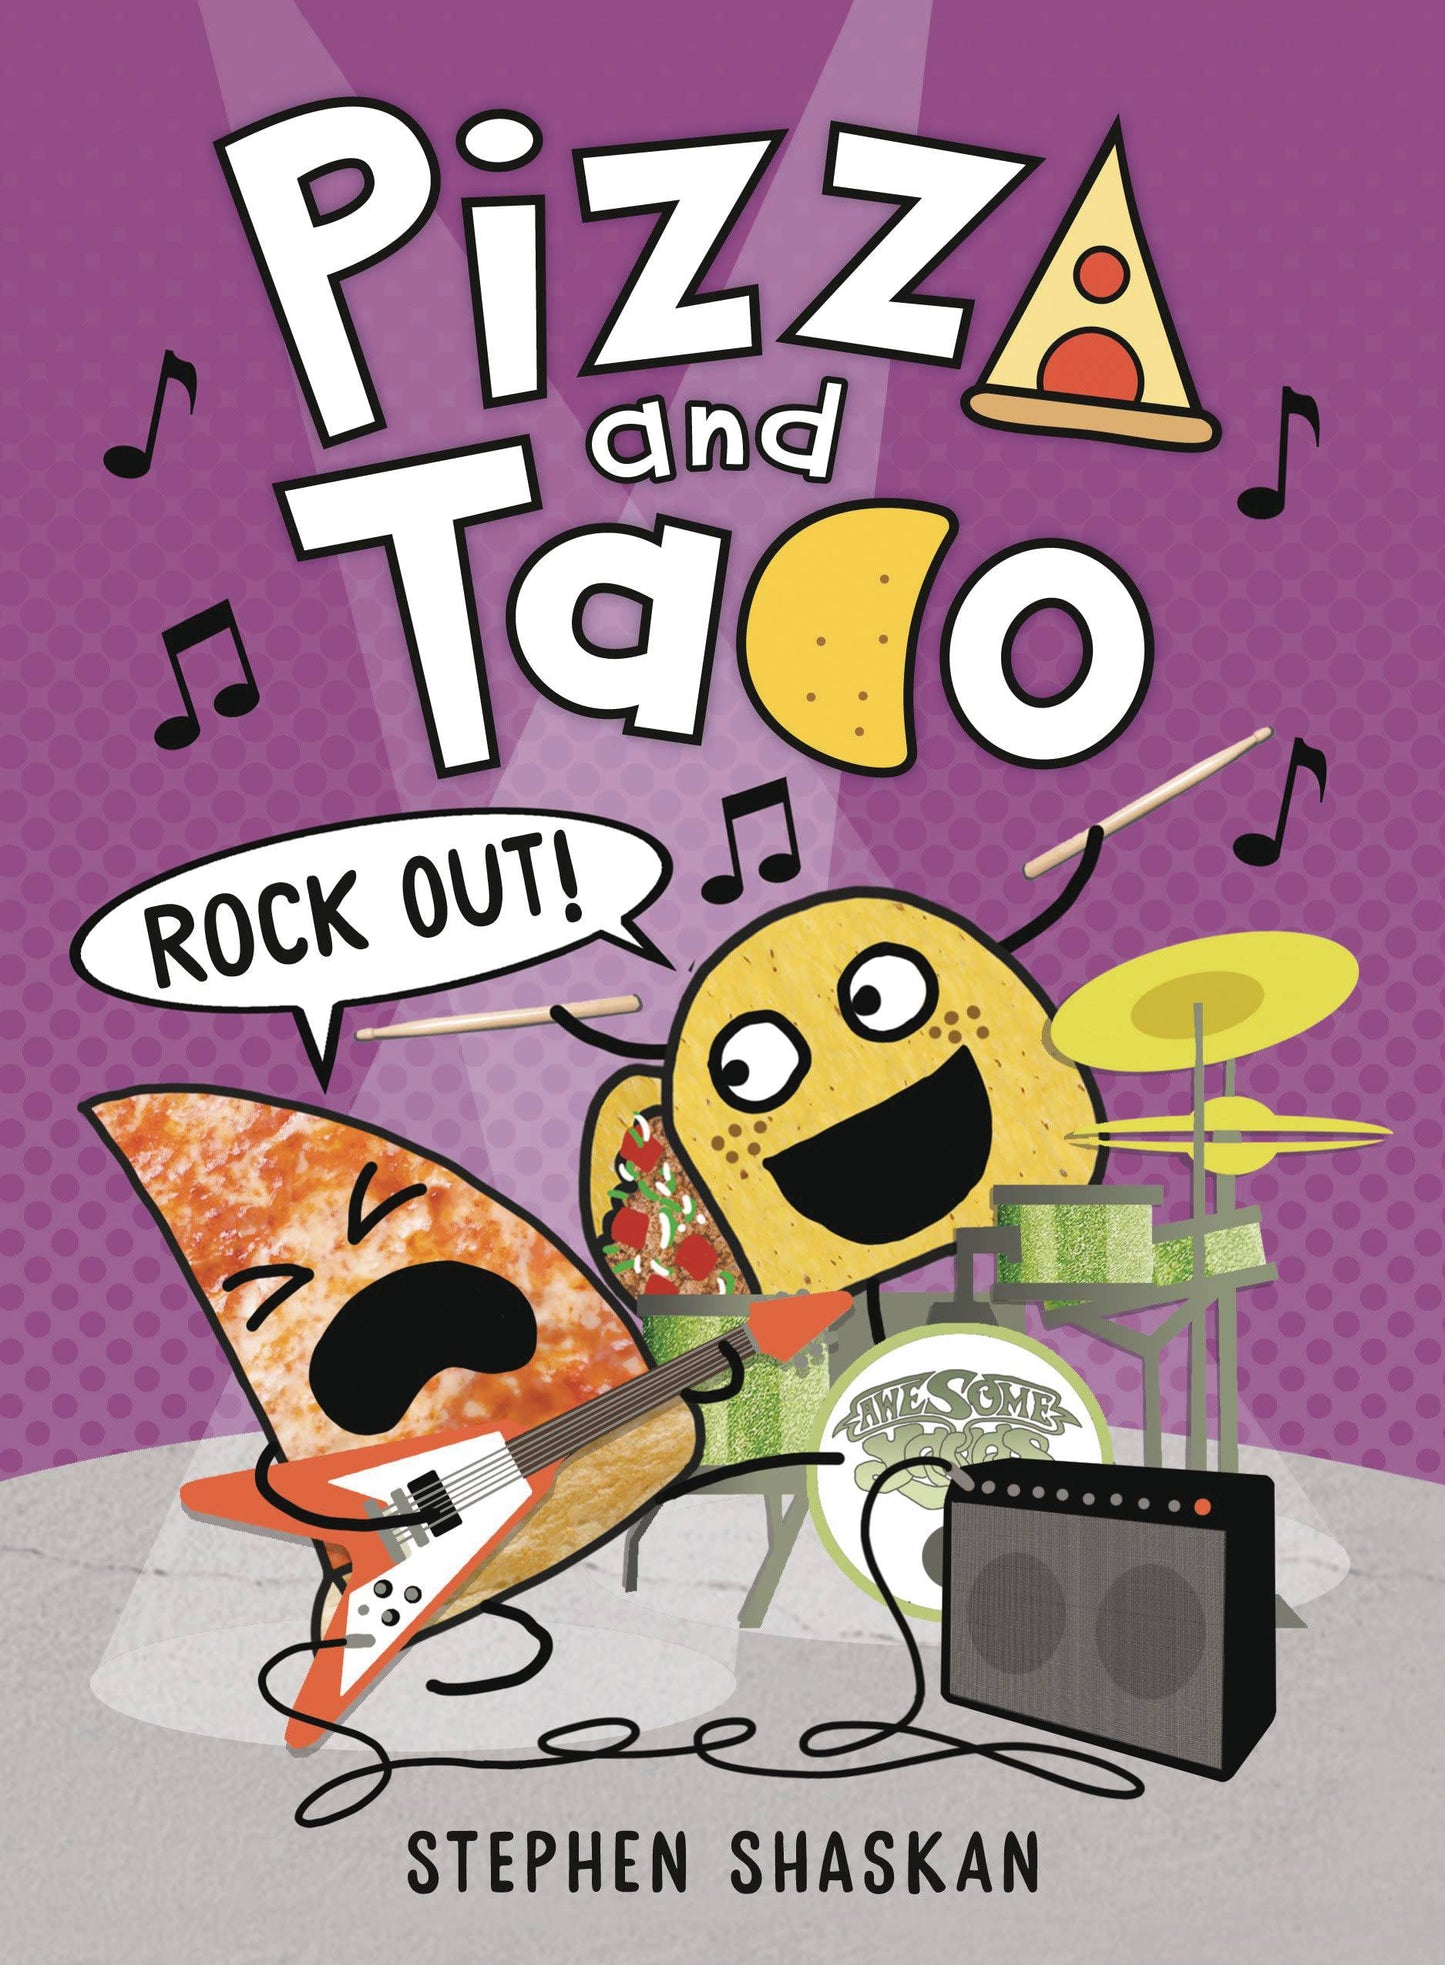 The One Stop Shop Comics & Games Pizza And Taco Ya Gn Vol 05 Rock Out (C: 0-1-0) (01/04/2023) RANDOM HOUSE BOOKS YOUNG READE